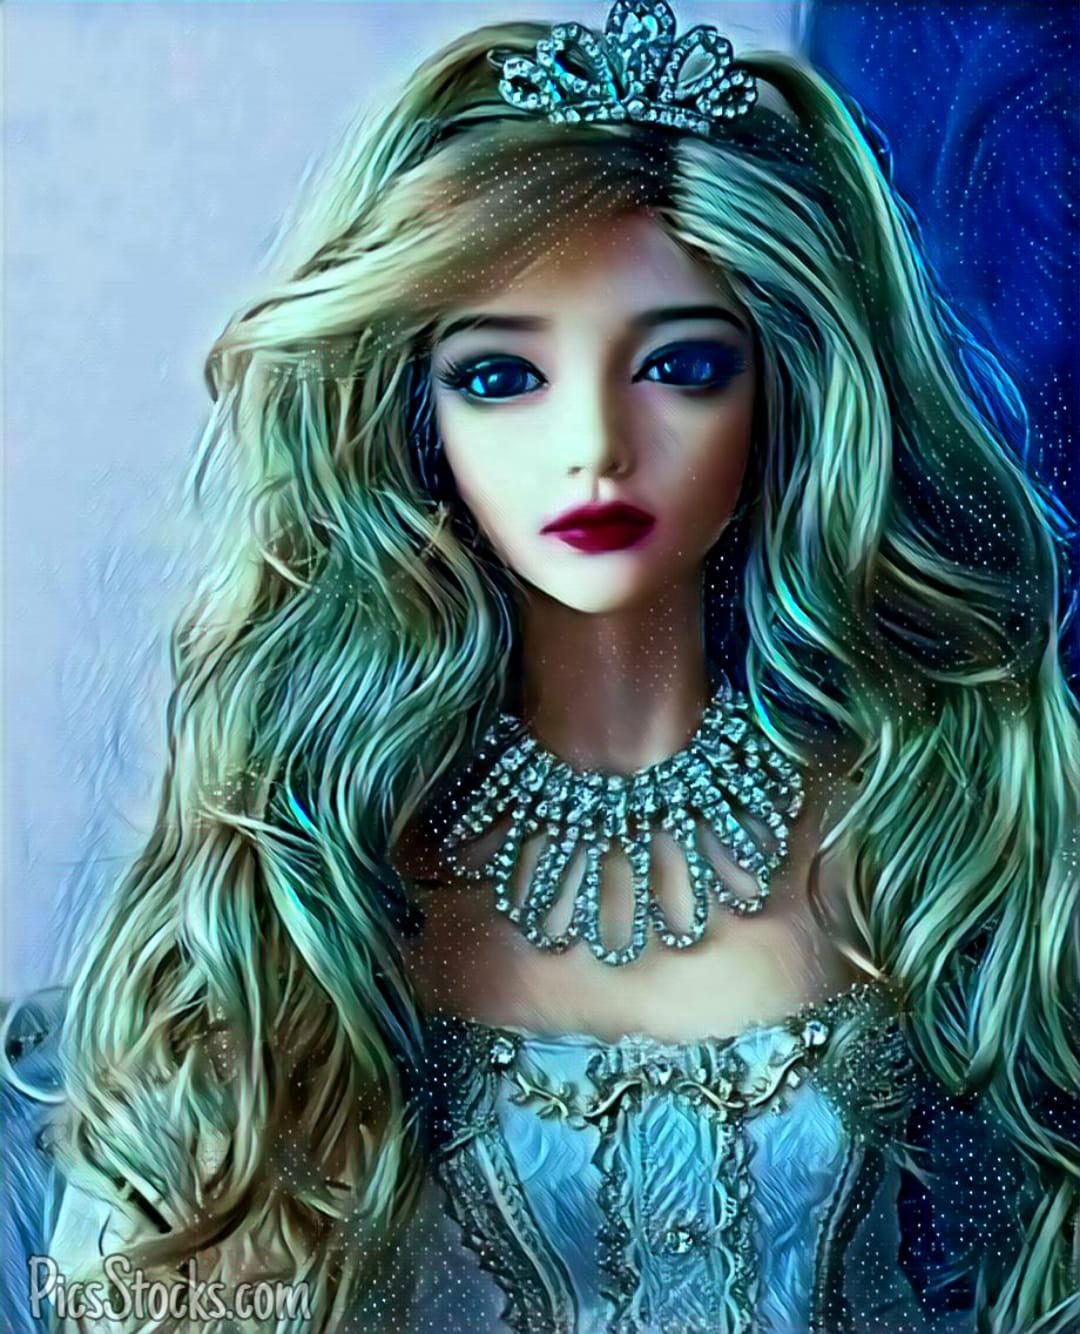 Doll Picture Wallpapers - Wallpaper Cave